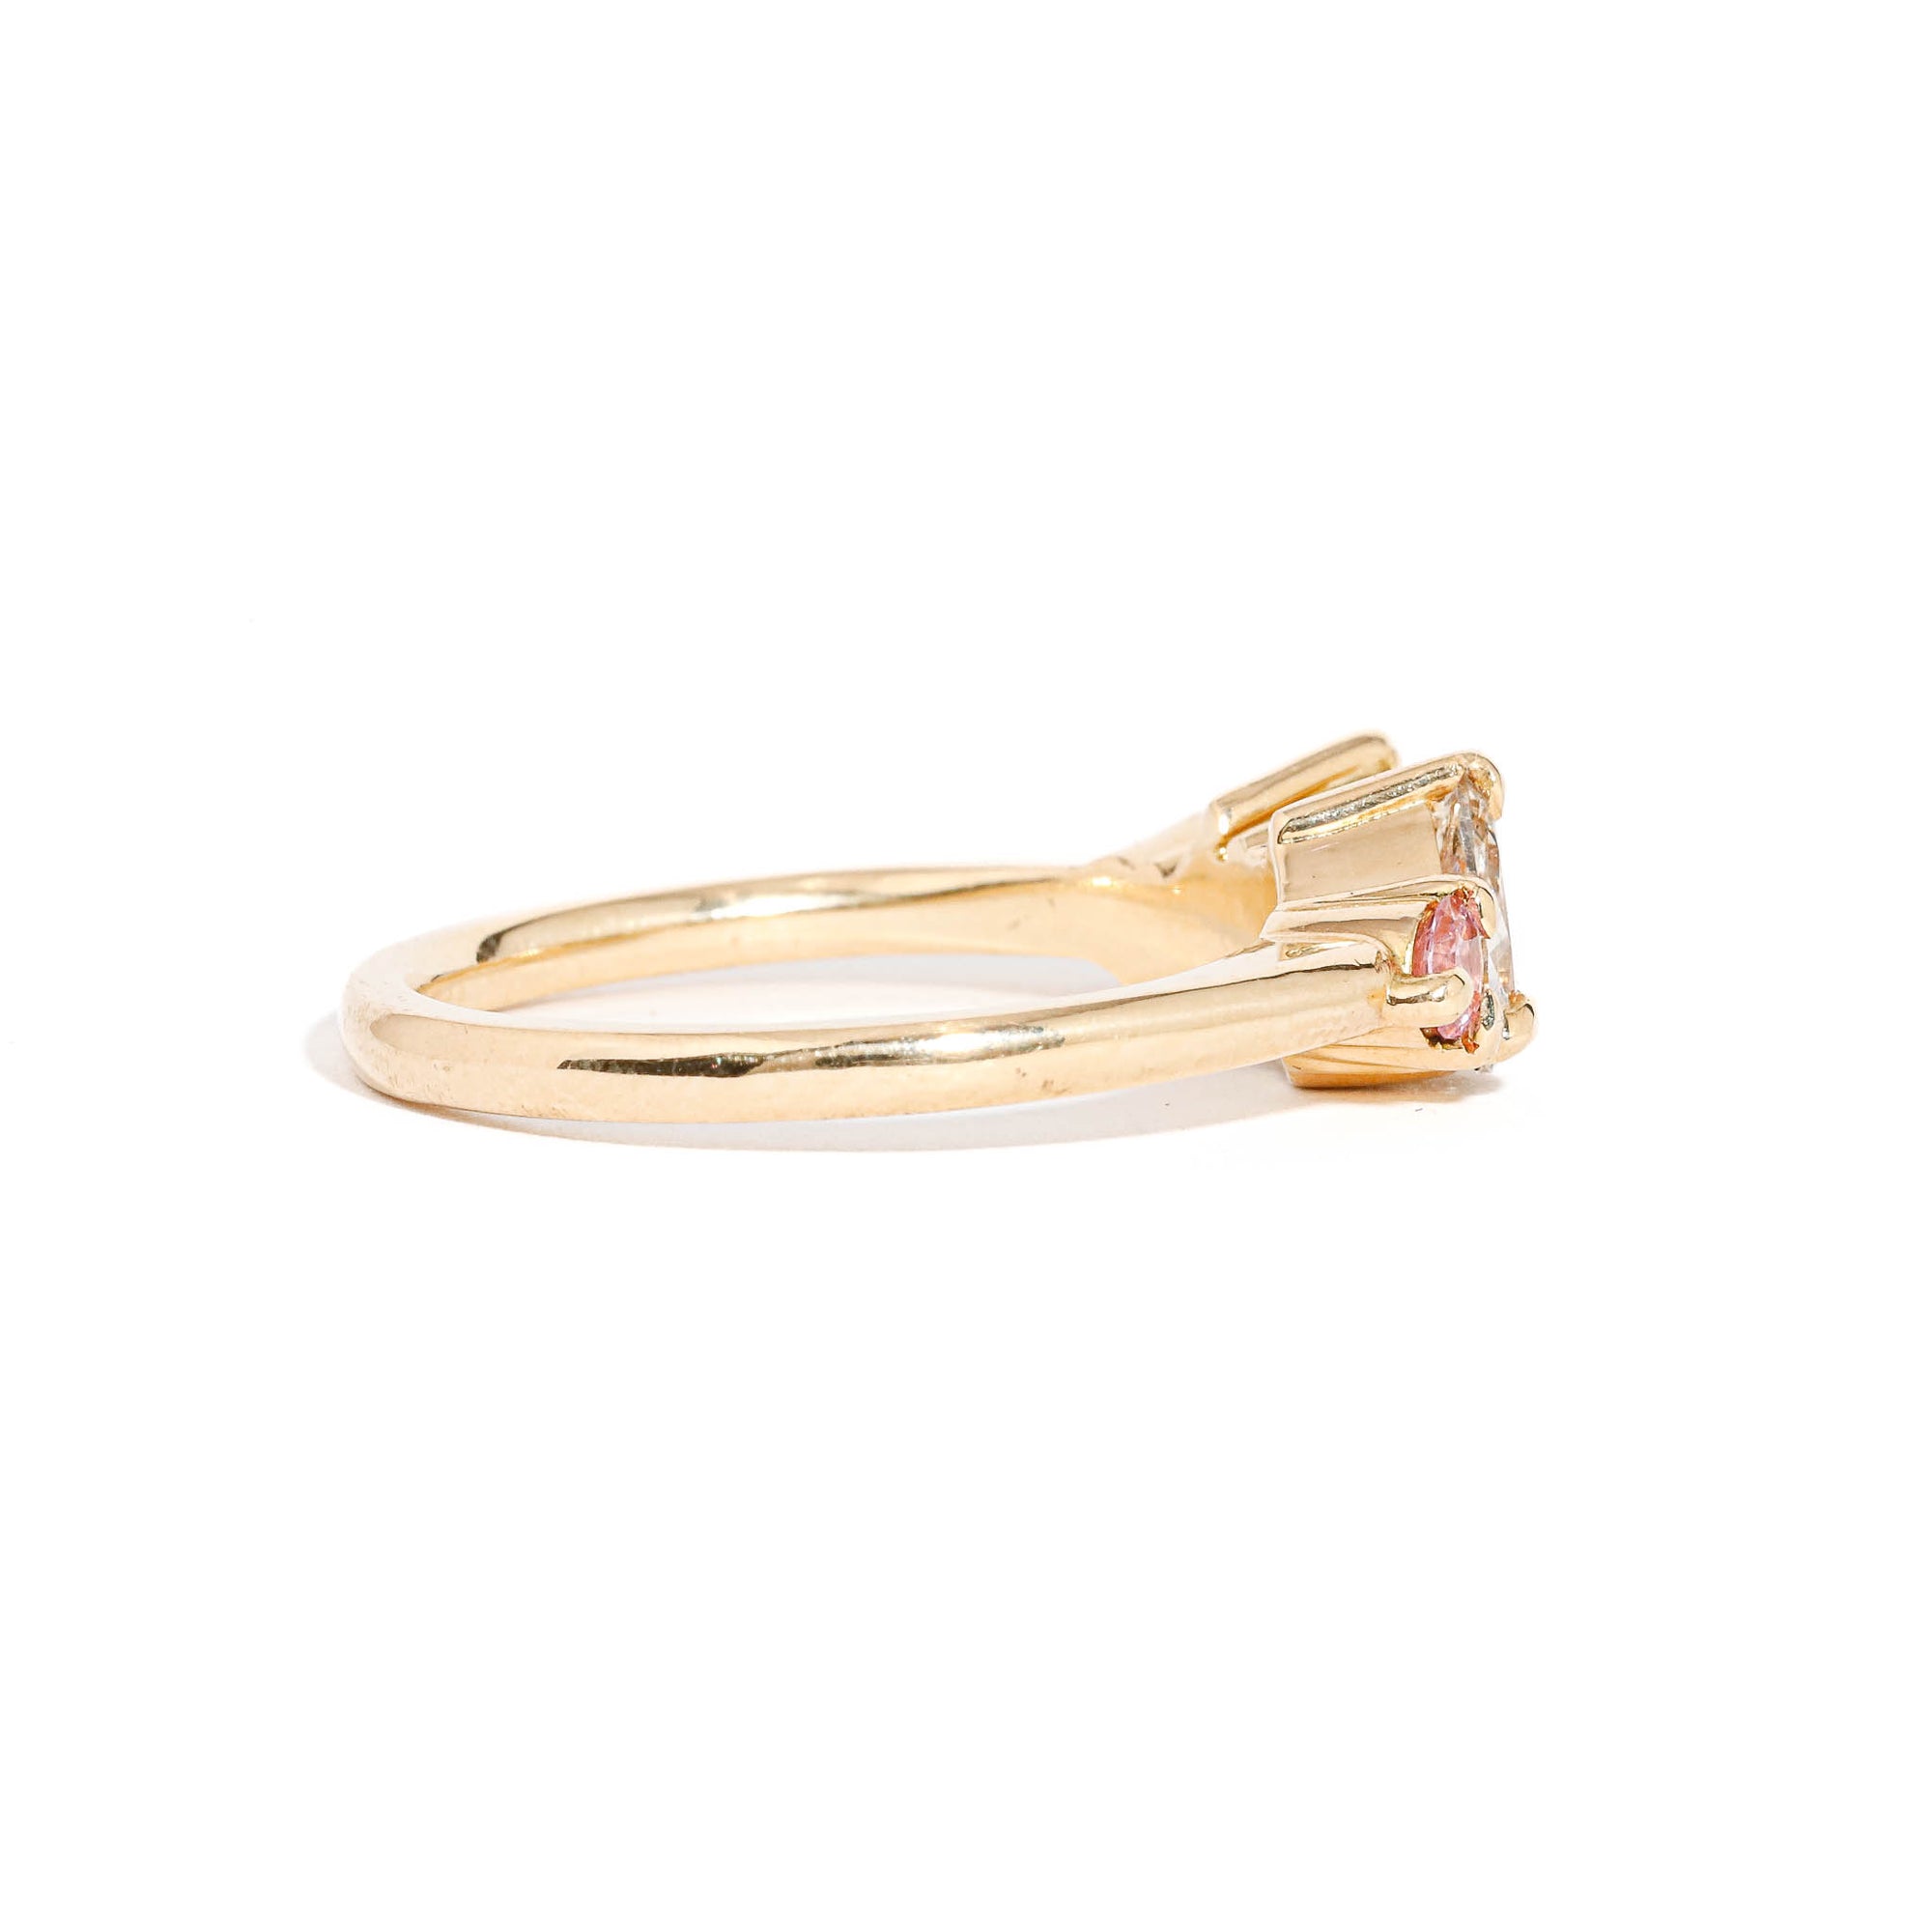 Pear Cut Diamond and Pink Sapphire Cluster Ring in 18ct Yellow Gold